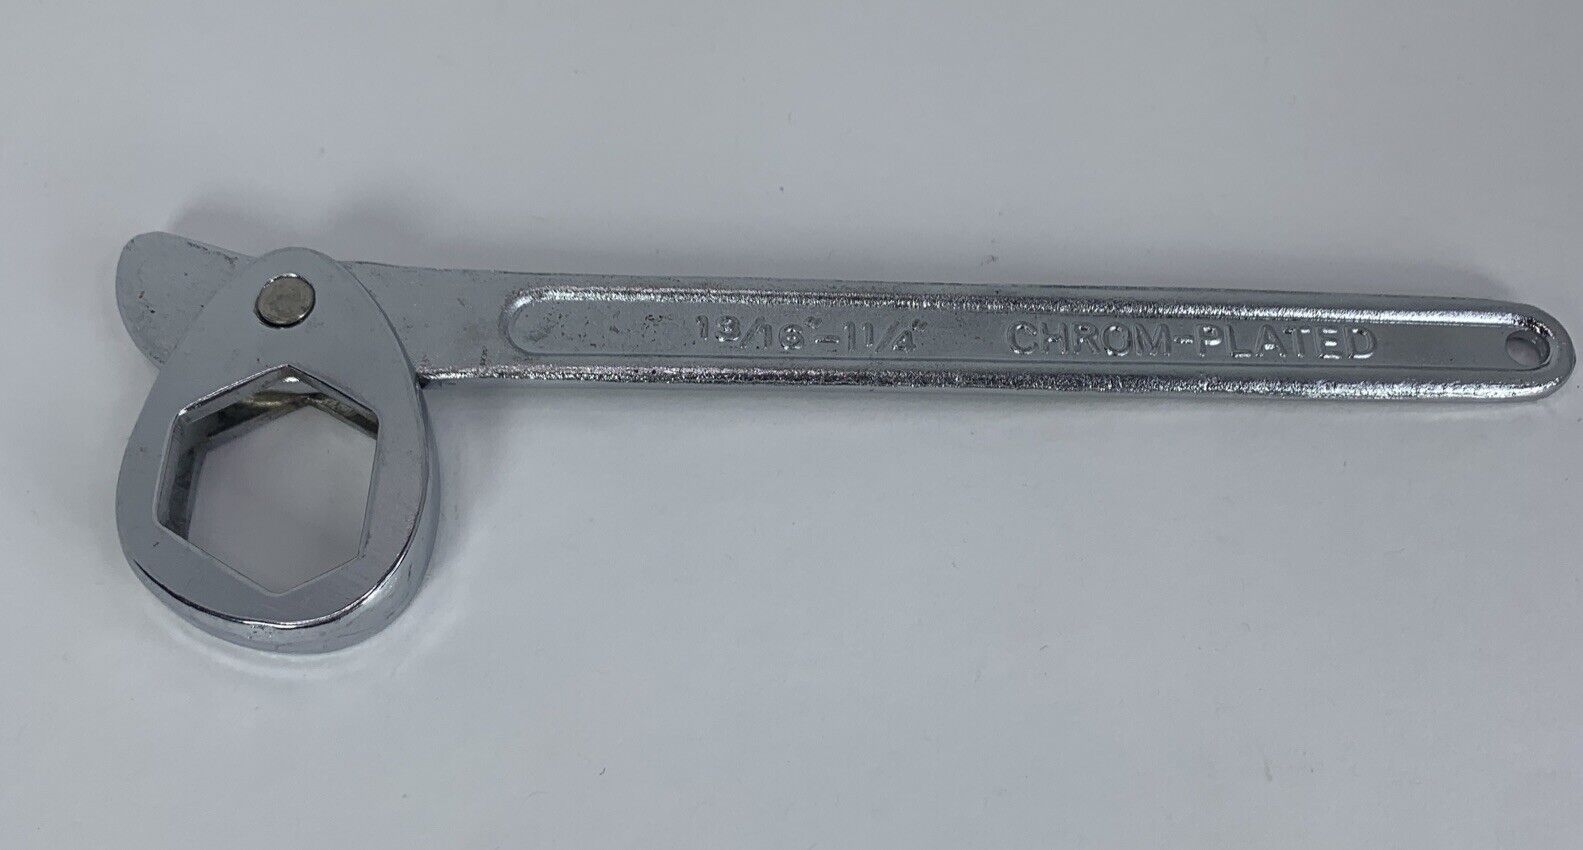 23-32 Heavy Duty WRENCH 13/16” to 1 1/4” Chrom-Plated Box End Super Spanner